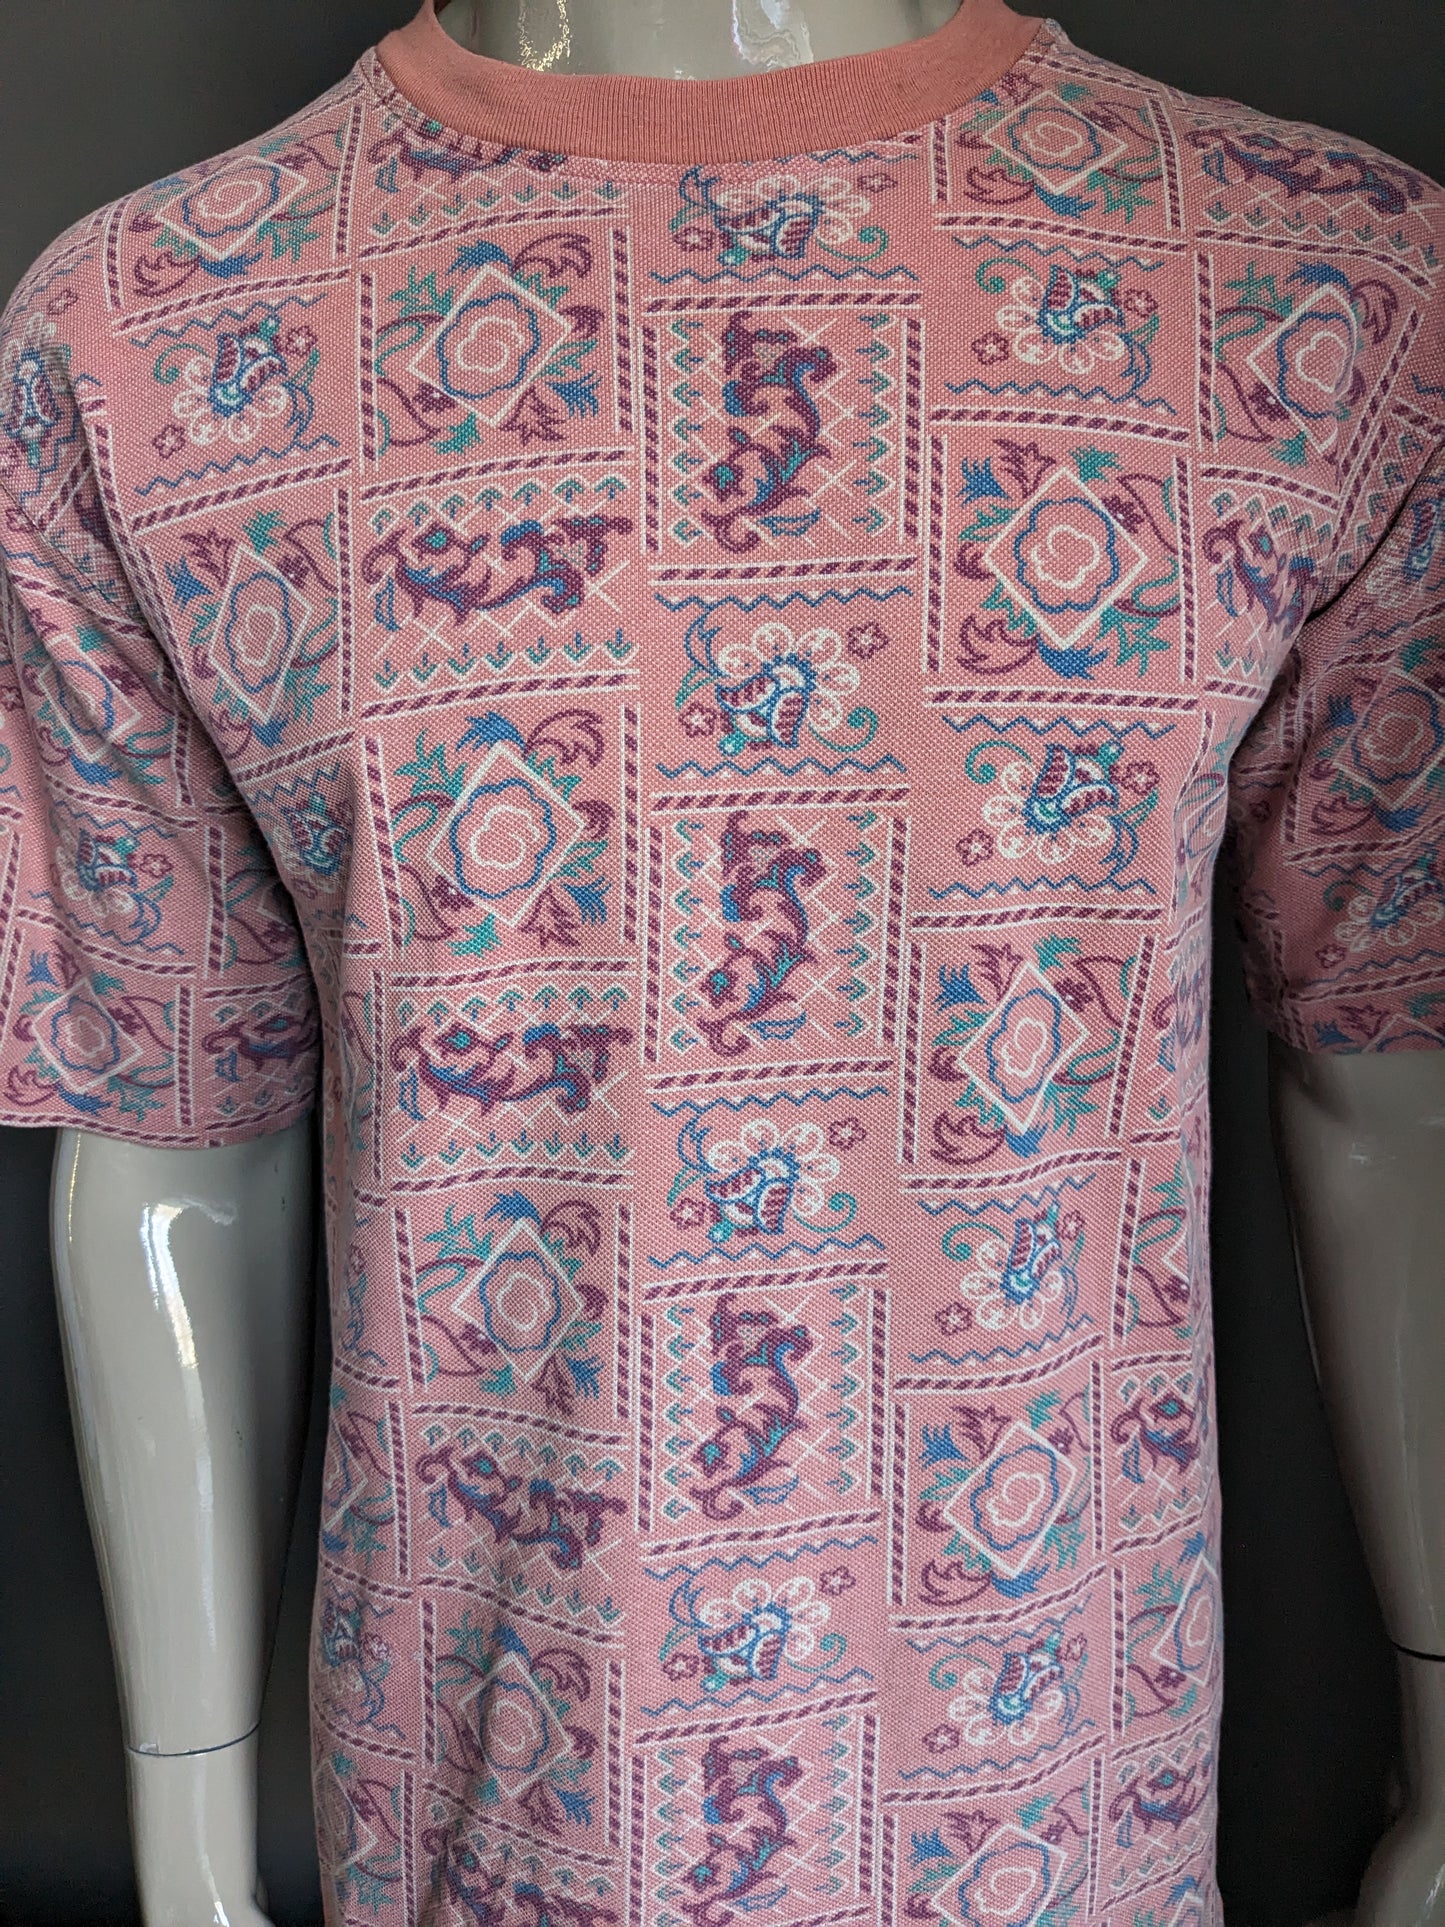 Vintage Winch shirt. Pink red blue green print. Size L.